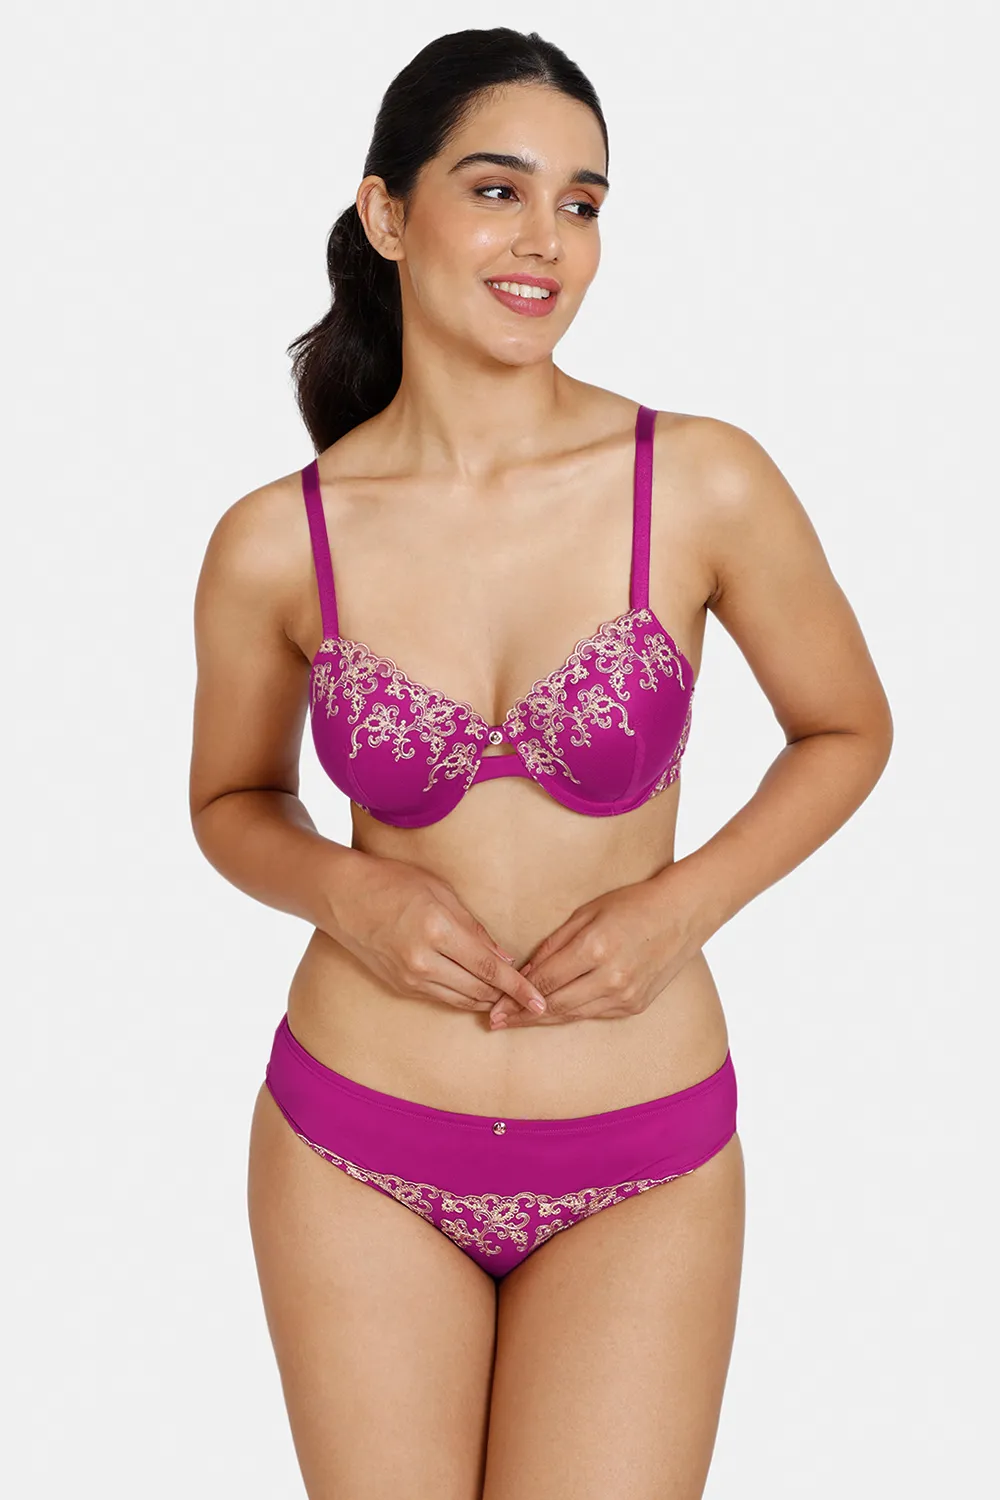 Net Non Padded Bra Panty Lingerie Set at Rs 69/piece